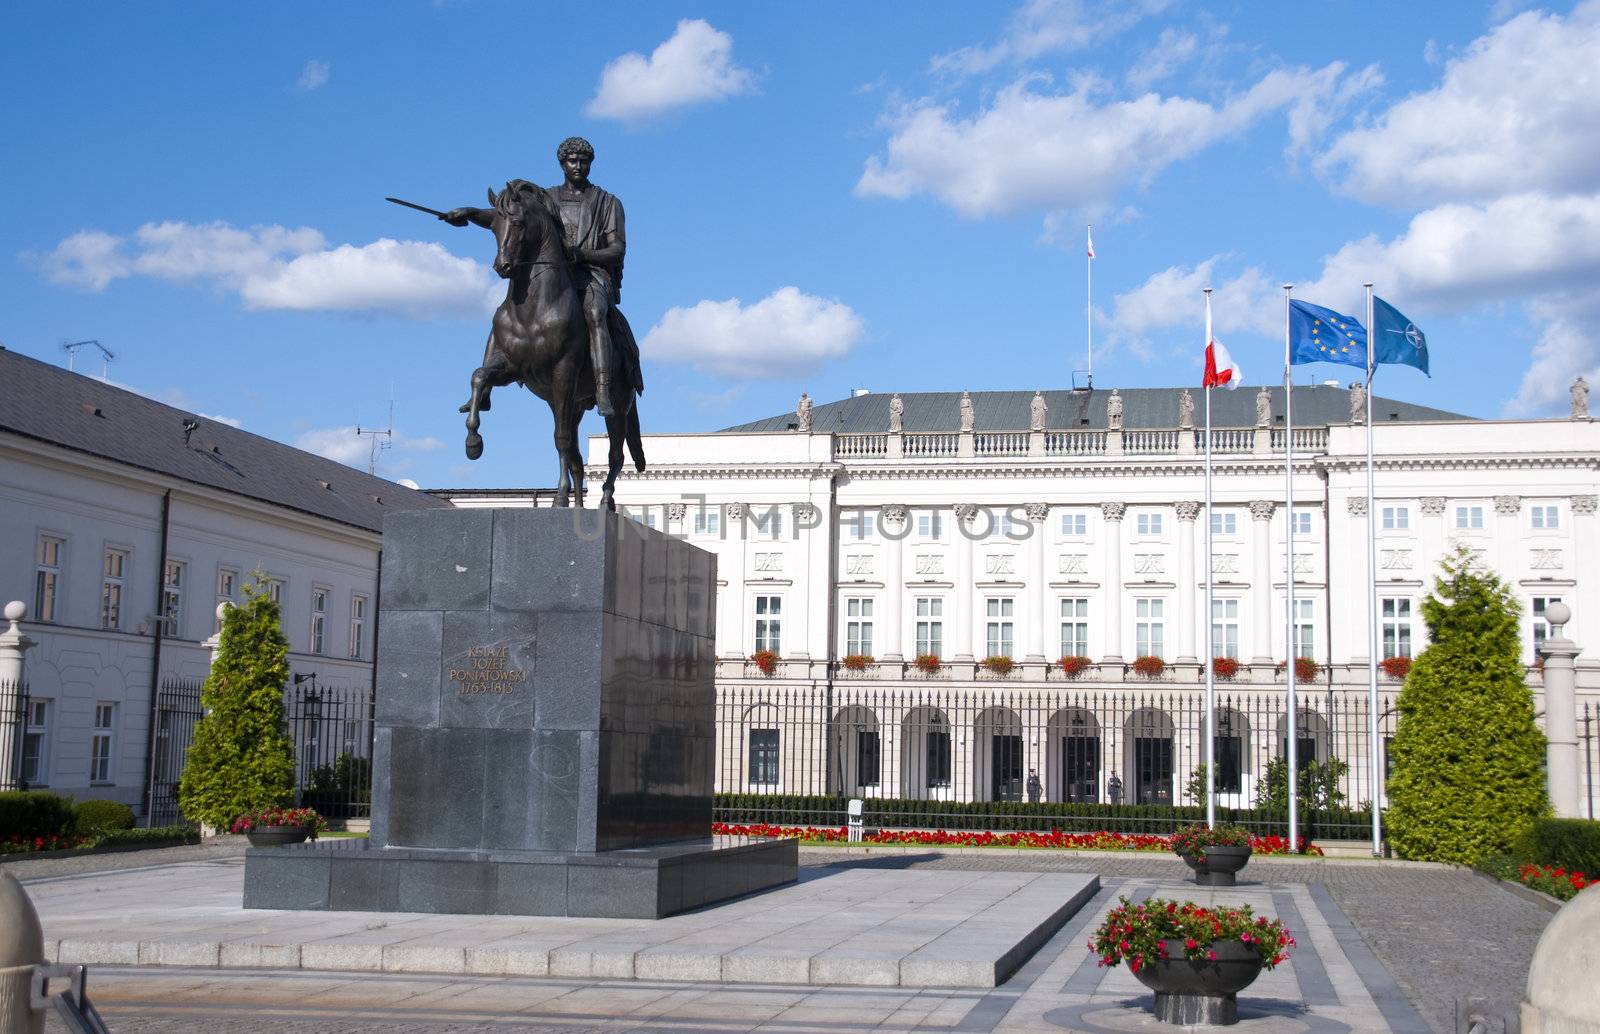 The ministry of defense in warsaw, Poland